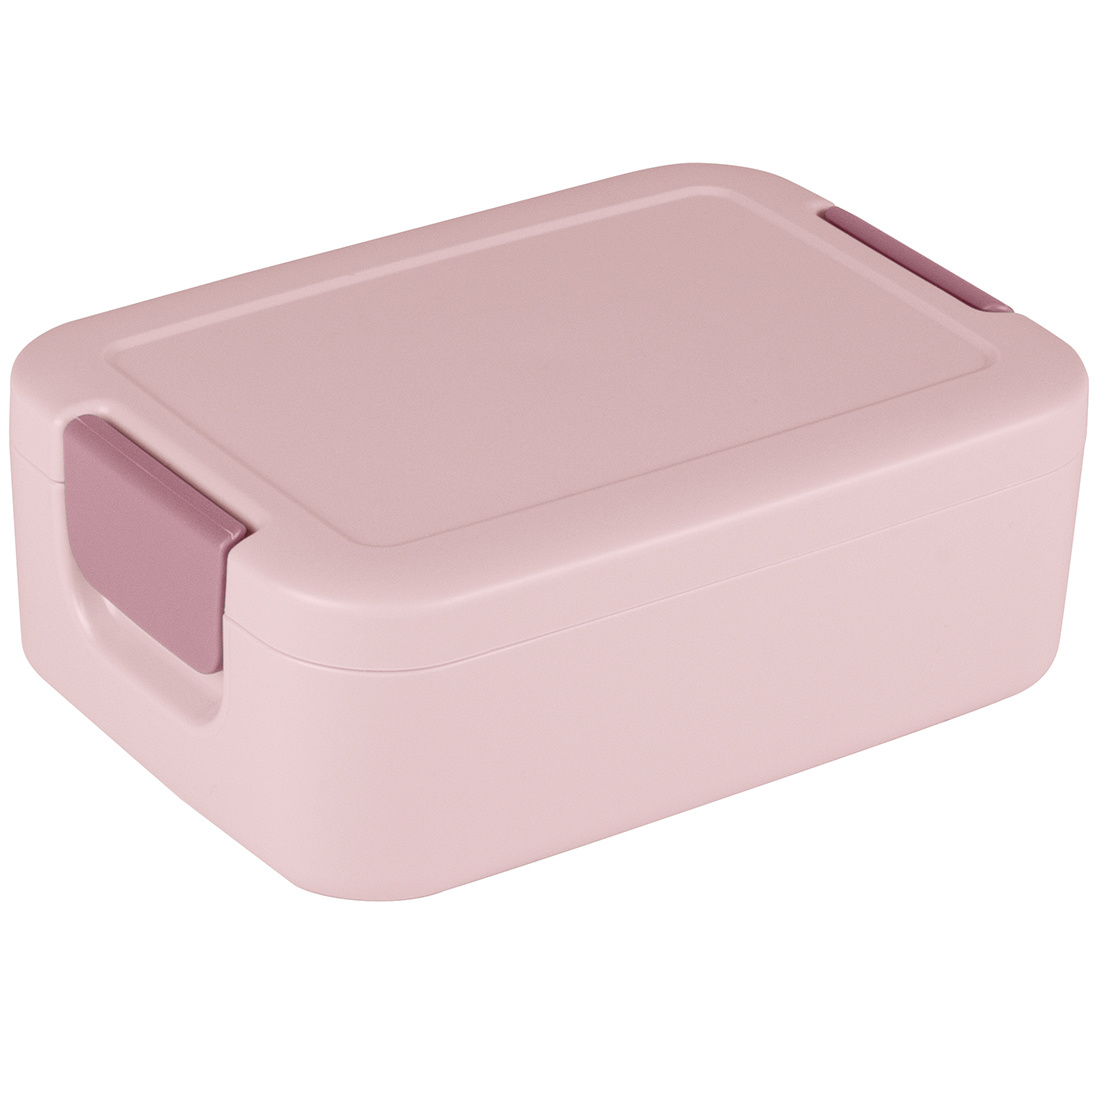 Sigma home Food to go Lunchbox klein rosa